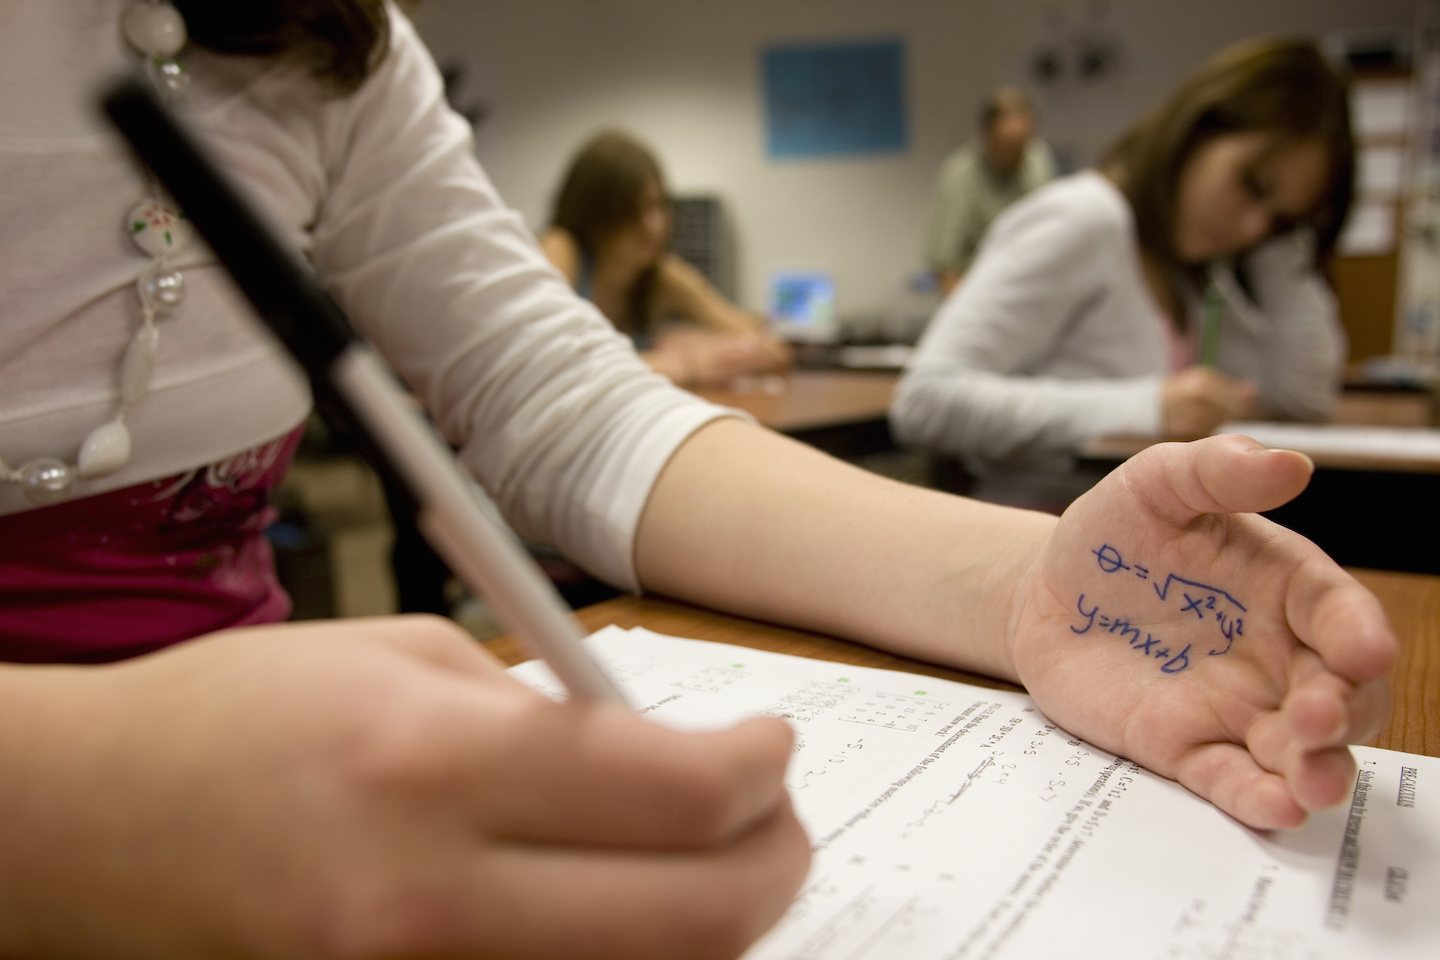 a girl taking a test holds her palm out in front of her on the desk to read an equation she has written in pen on her hand